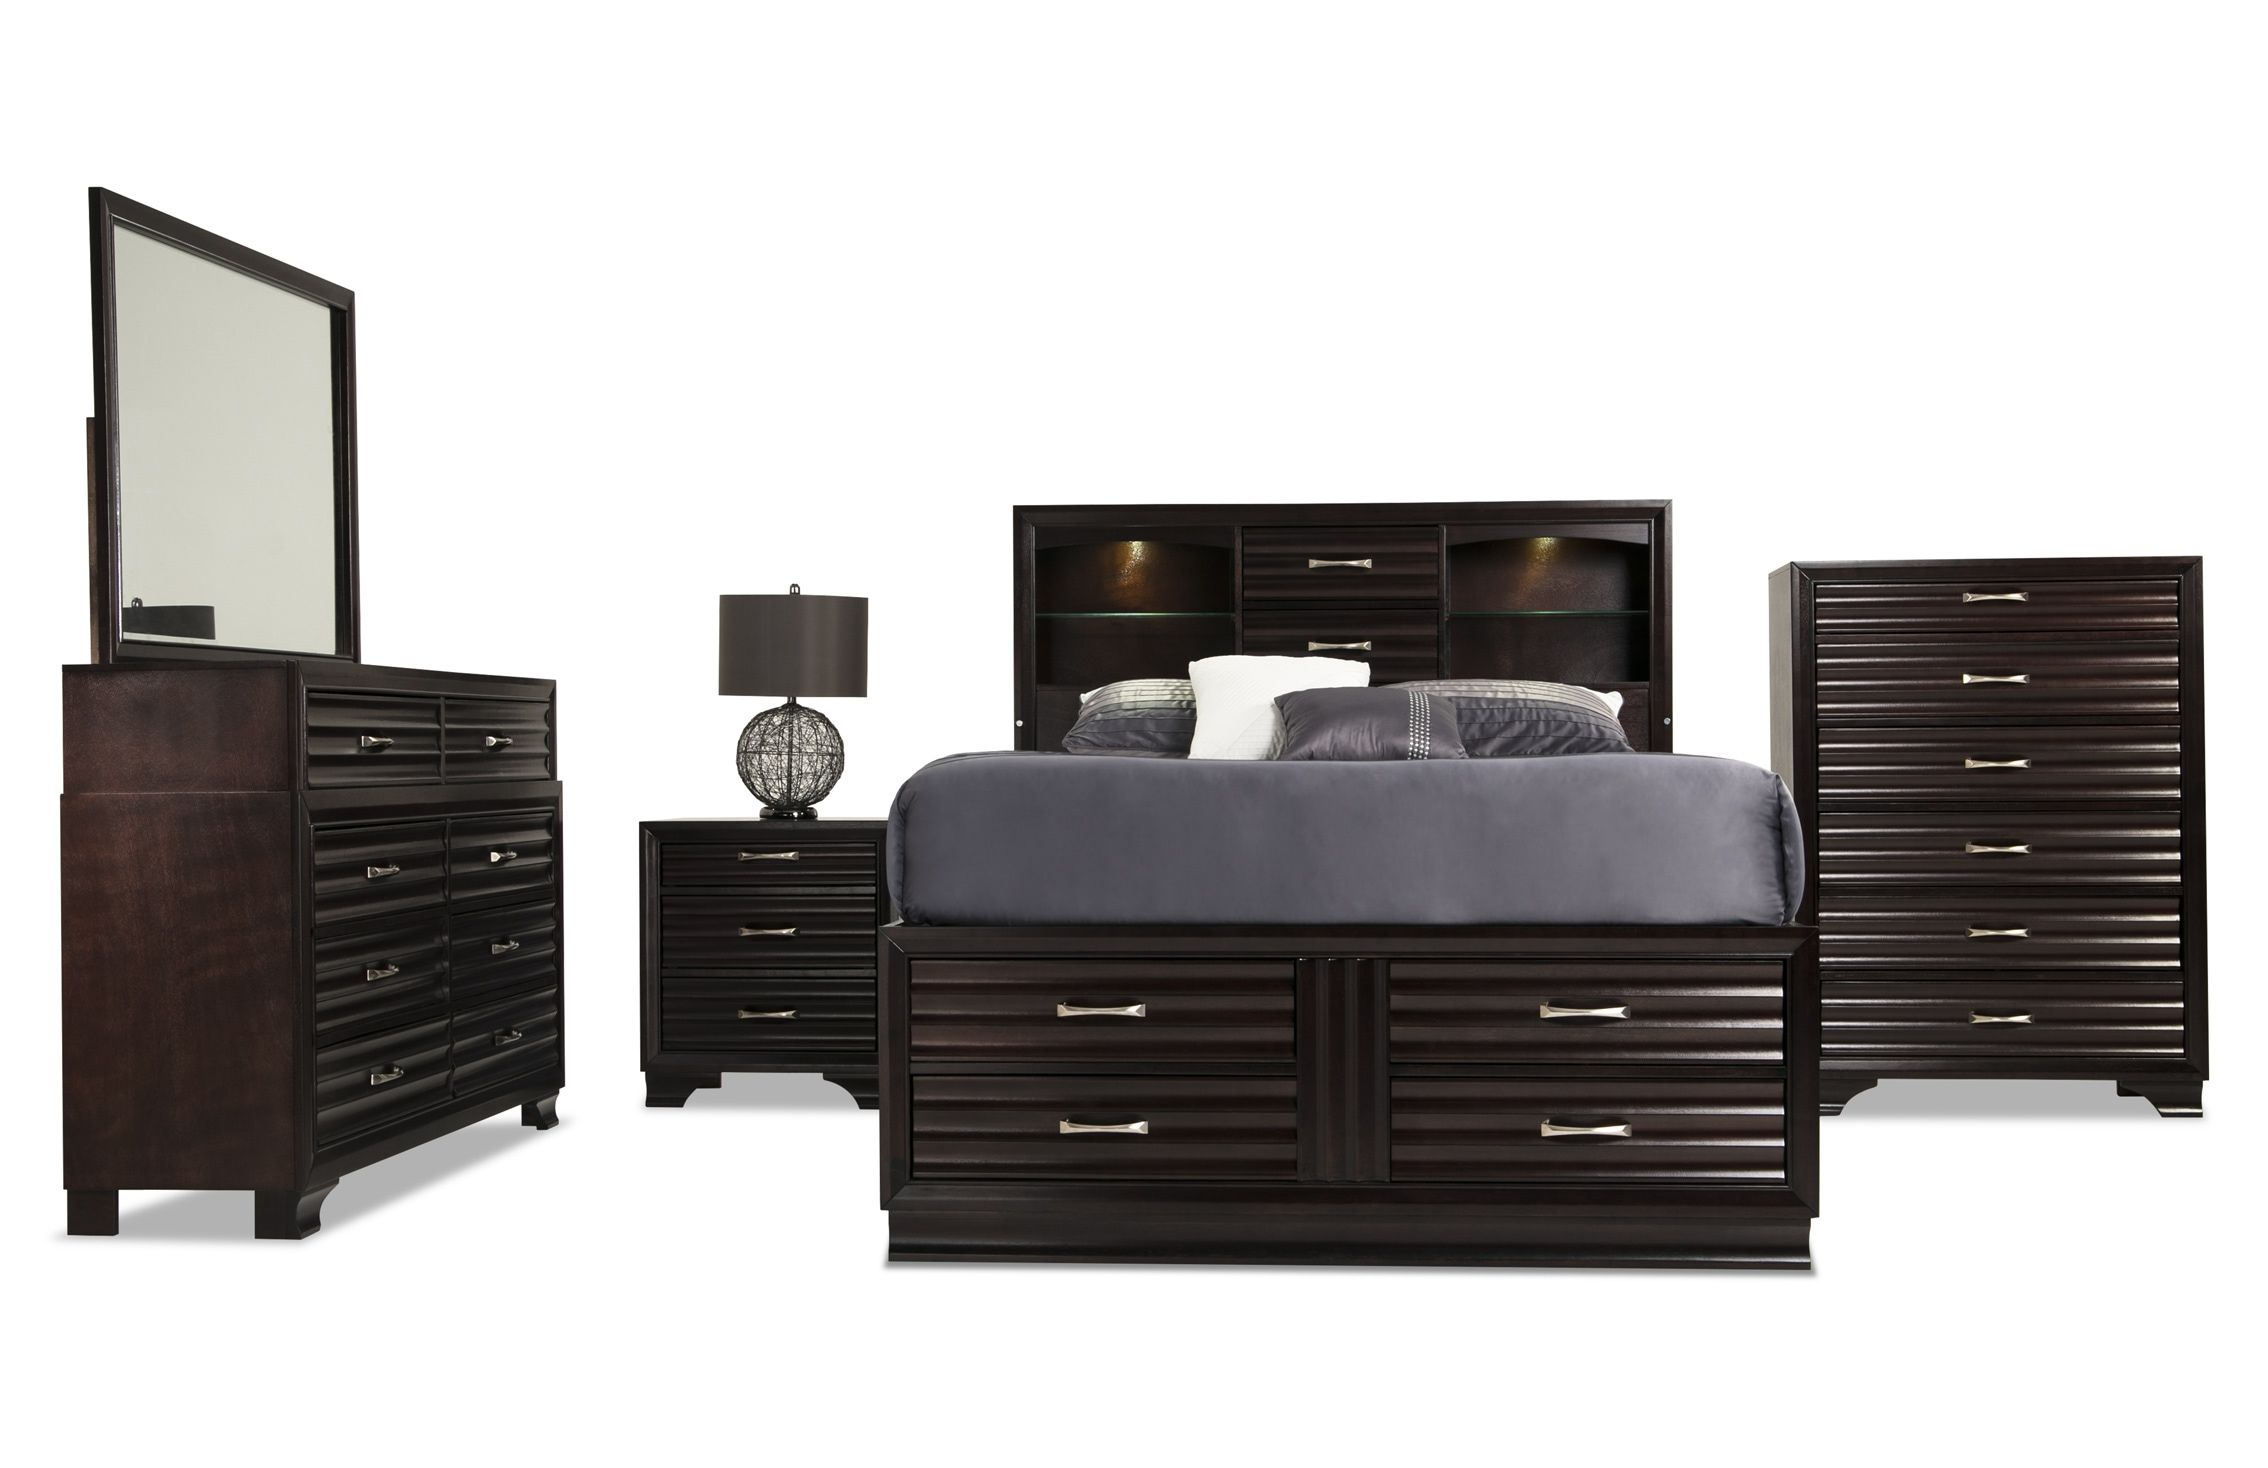 Midtown Storage Bedroom Set Home Decorating Ideas In 2019 with regard to size 2268 X 1468